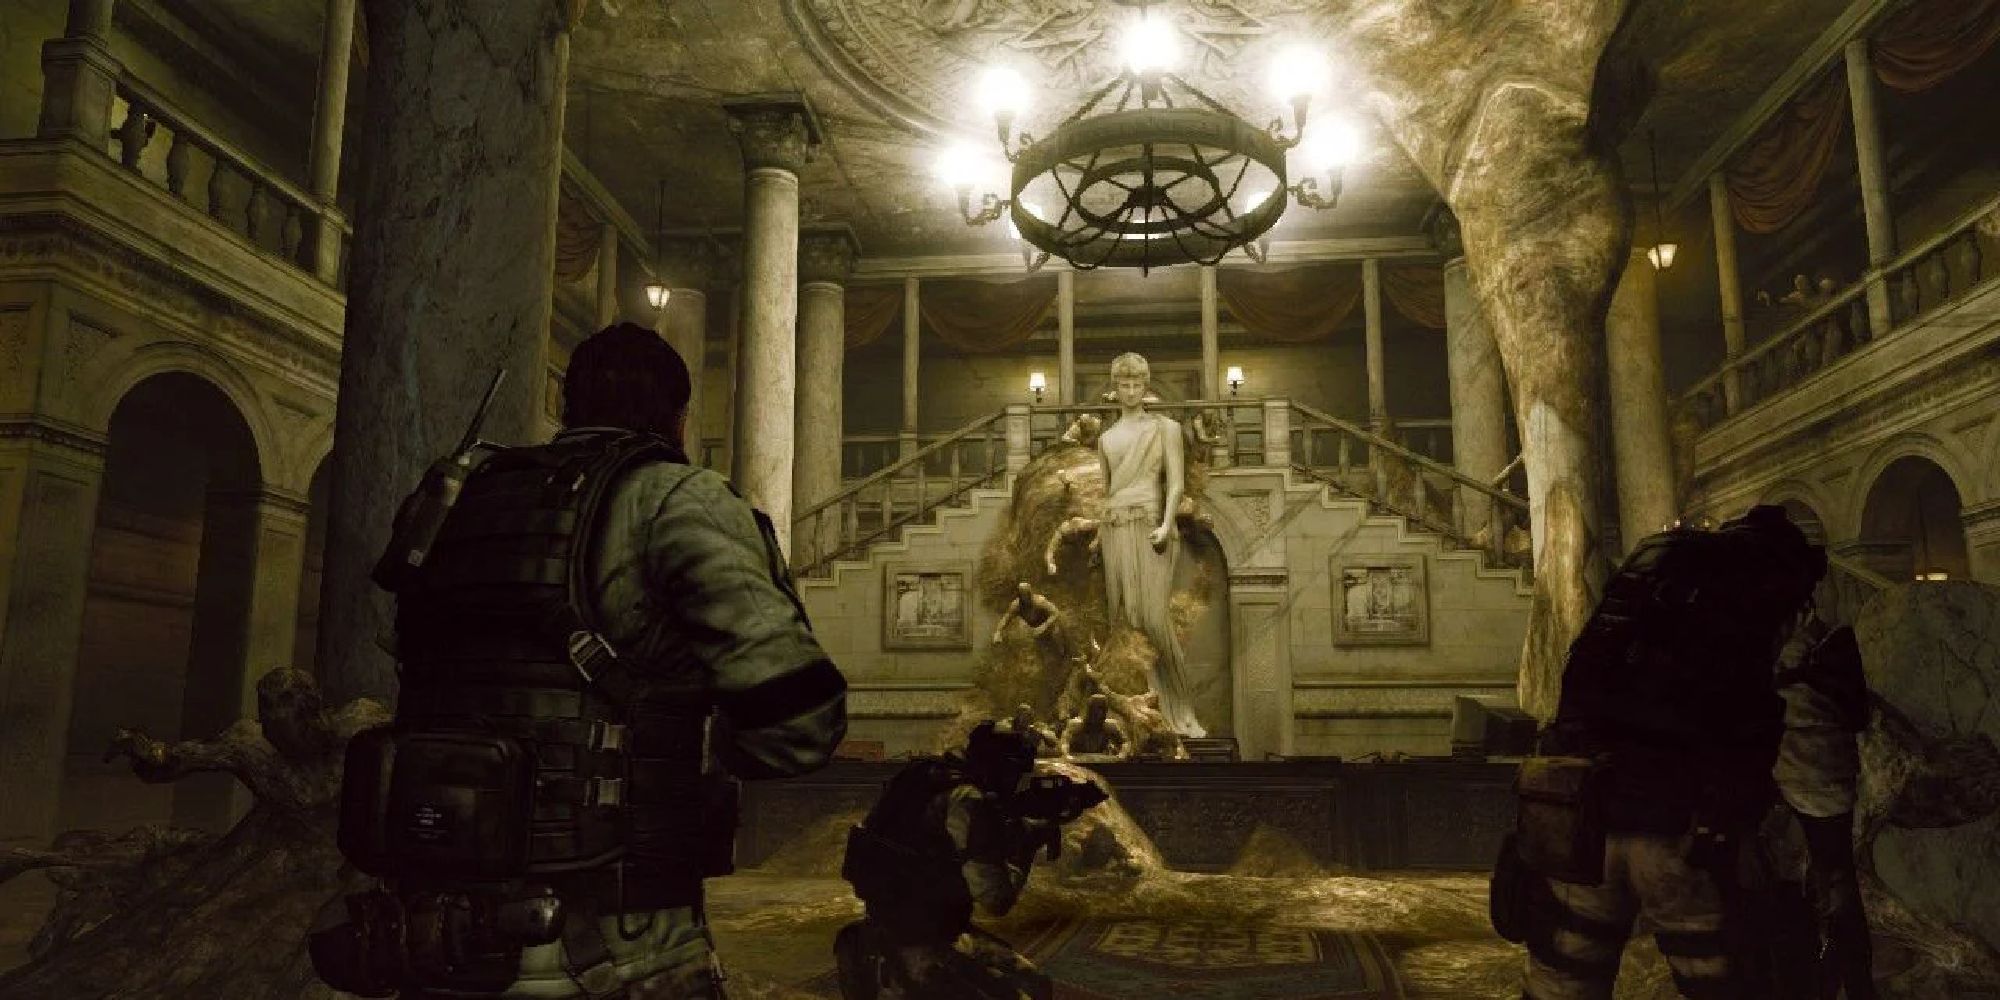 A screenshot of Chris and Pierce's mission from Resident Wvil 6 thats takes into a tastefully decorated mansion complete with a chandelier and large statue.